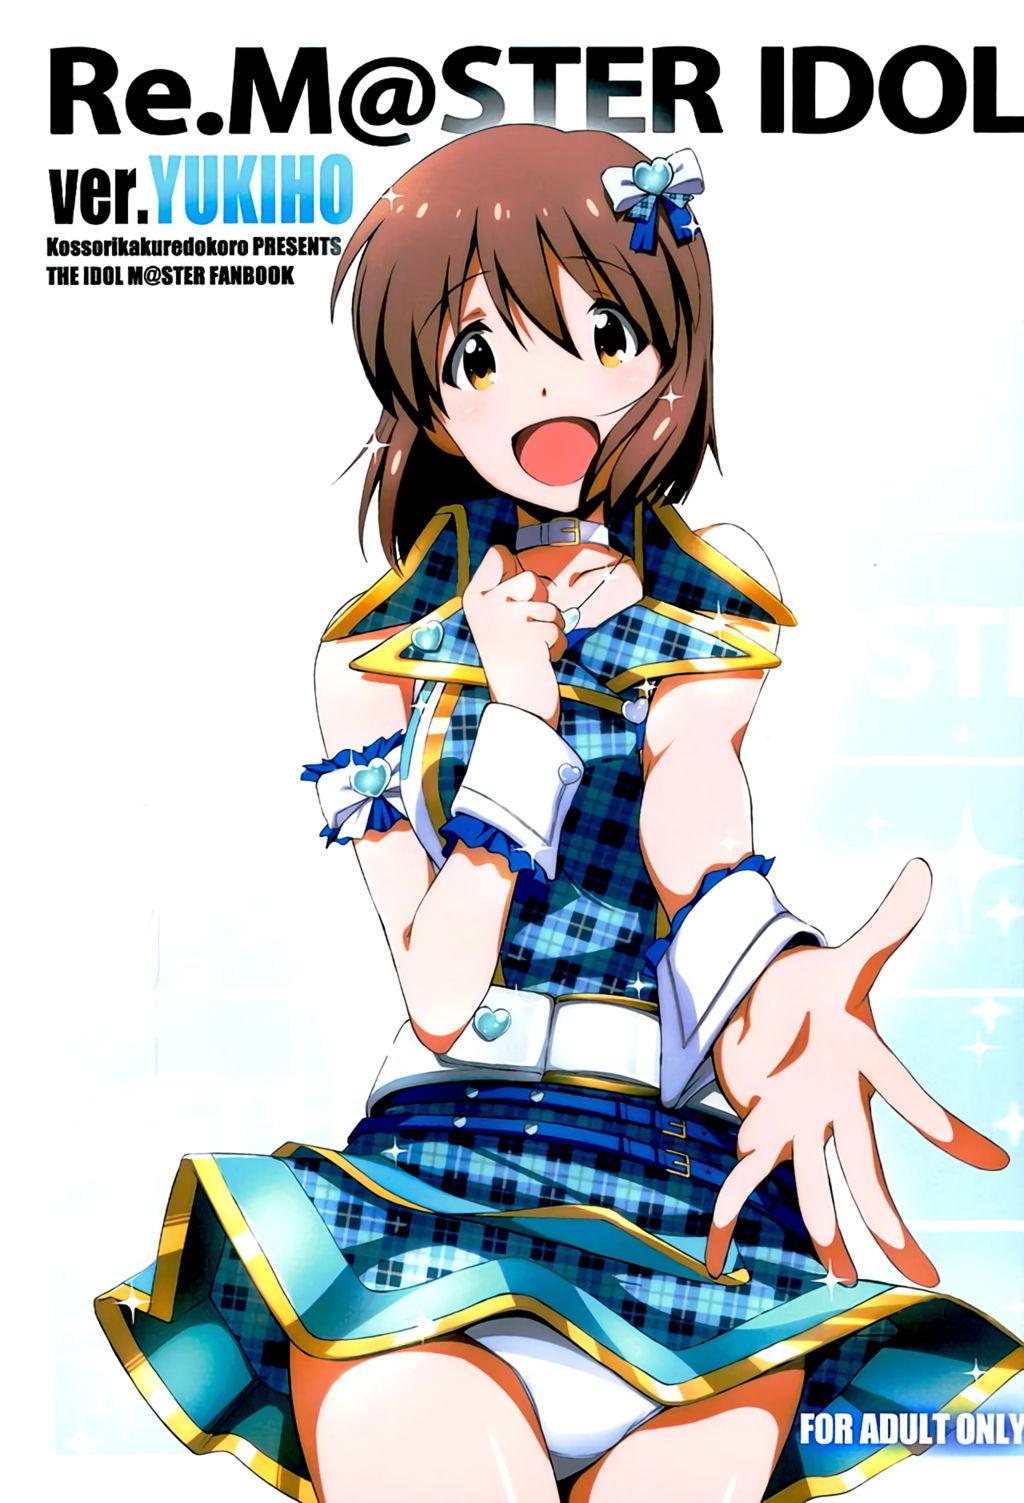 Price Re:M@STER IDOL ver.YUKIHO - The idolmaster From - Page 2